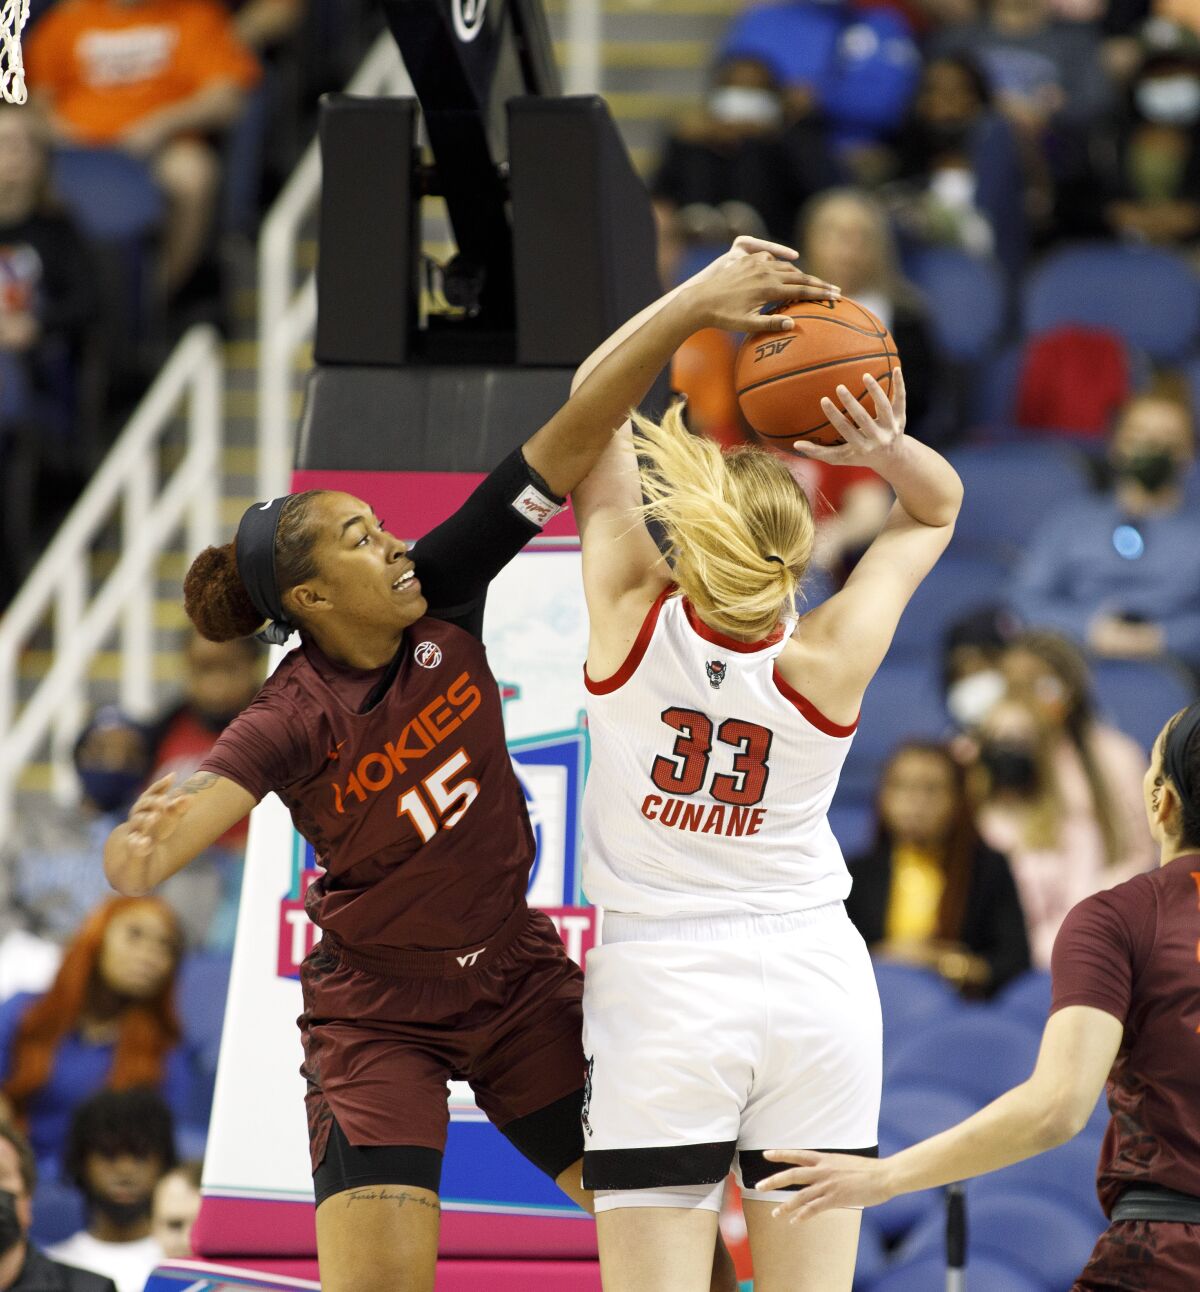 Virginia Tech guard Azana Baines (15) blocks the shot of North Carolina State center Elissa Cunane (33) during the first half of an NCAA college basketball game in the semifinals of the Atlantic Coast Conference women's tournament in Greensboro, N.C., Saturday, March 5, 2022. (AP Photo/Lynn Hey)